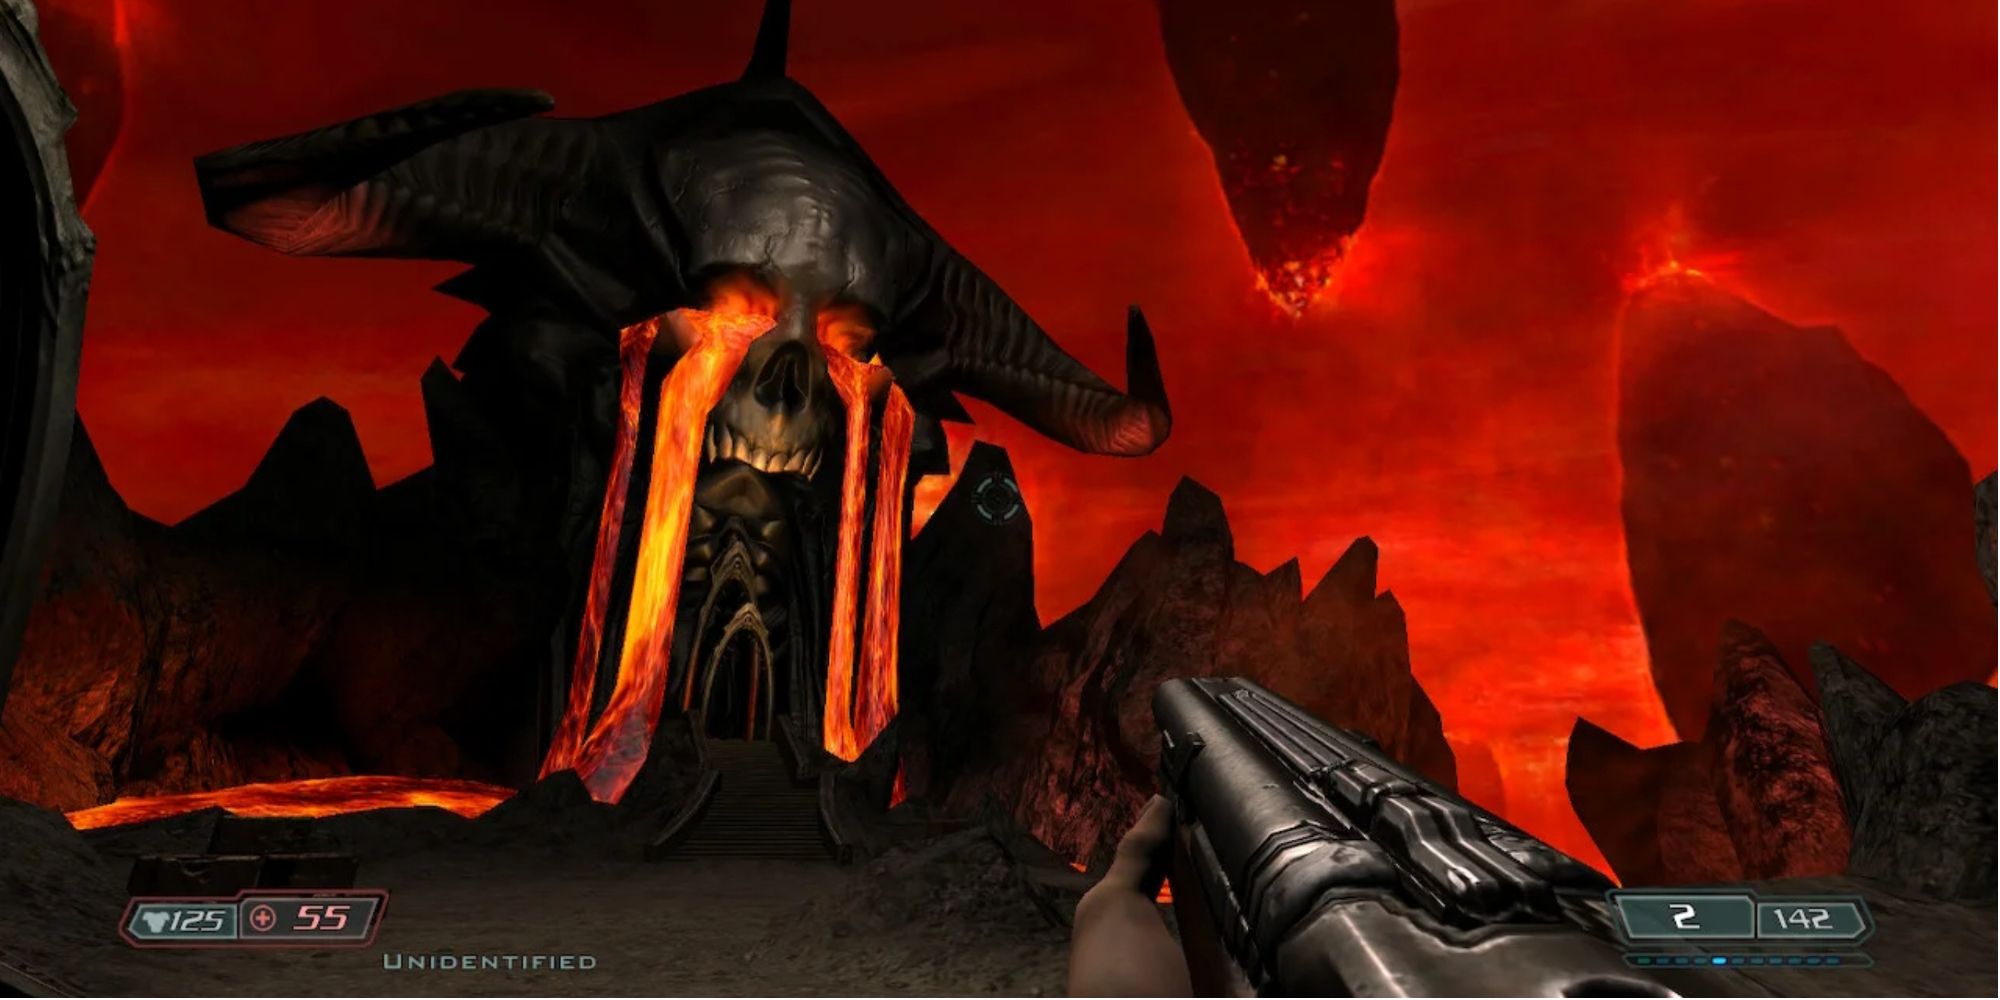 Doom 3 Hell is intense and scary